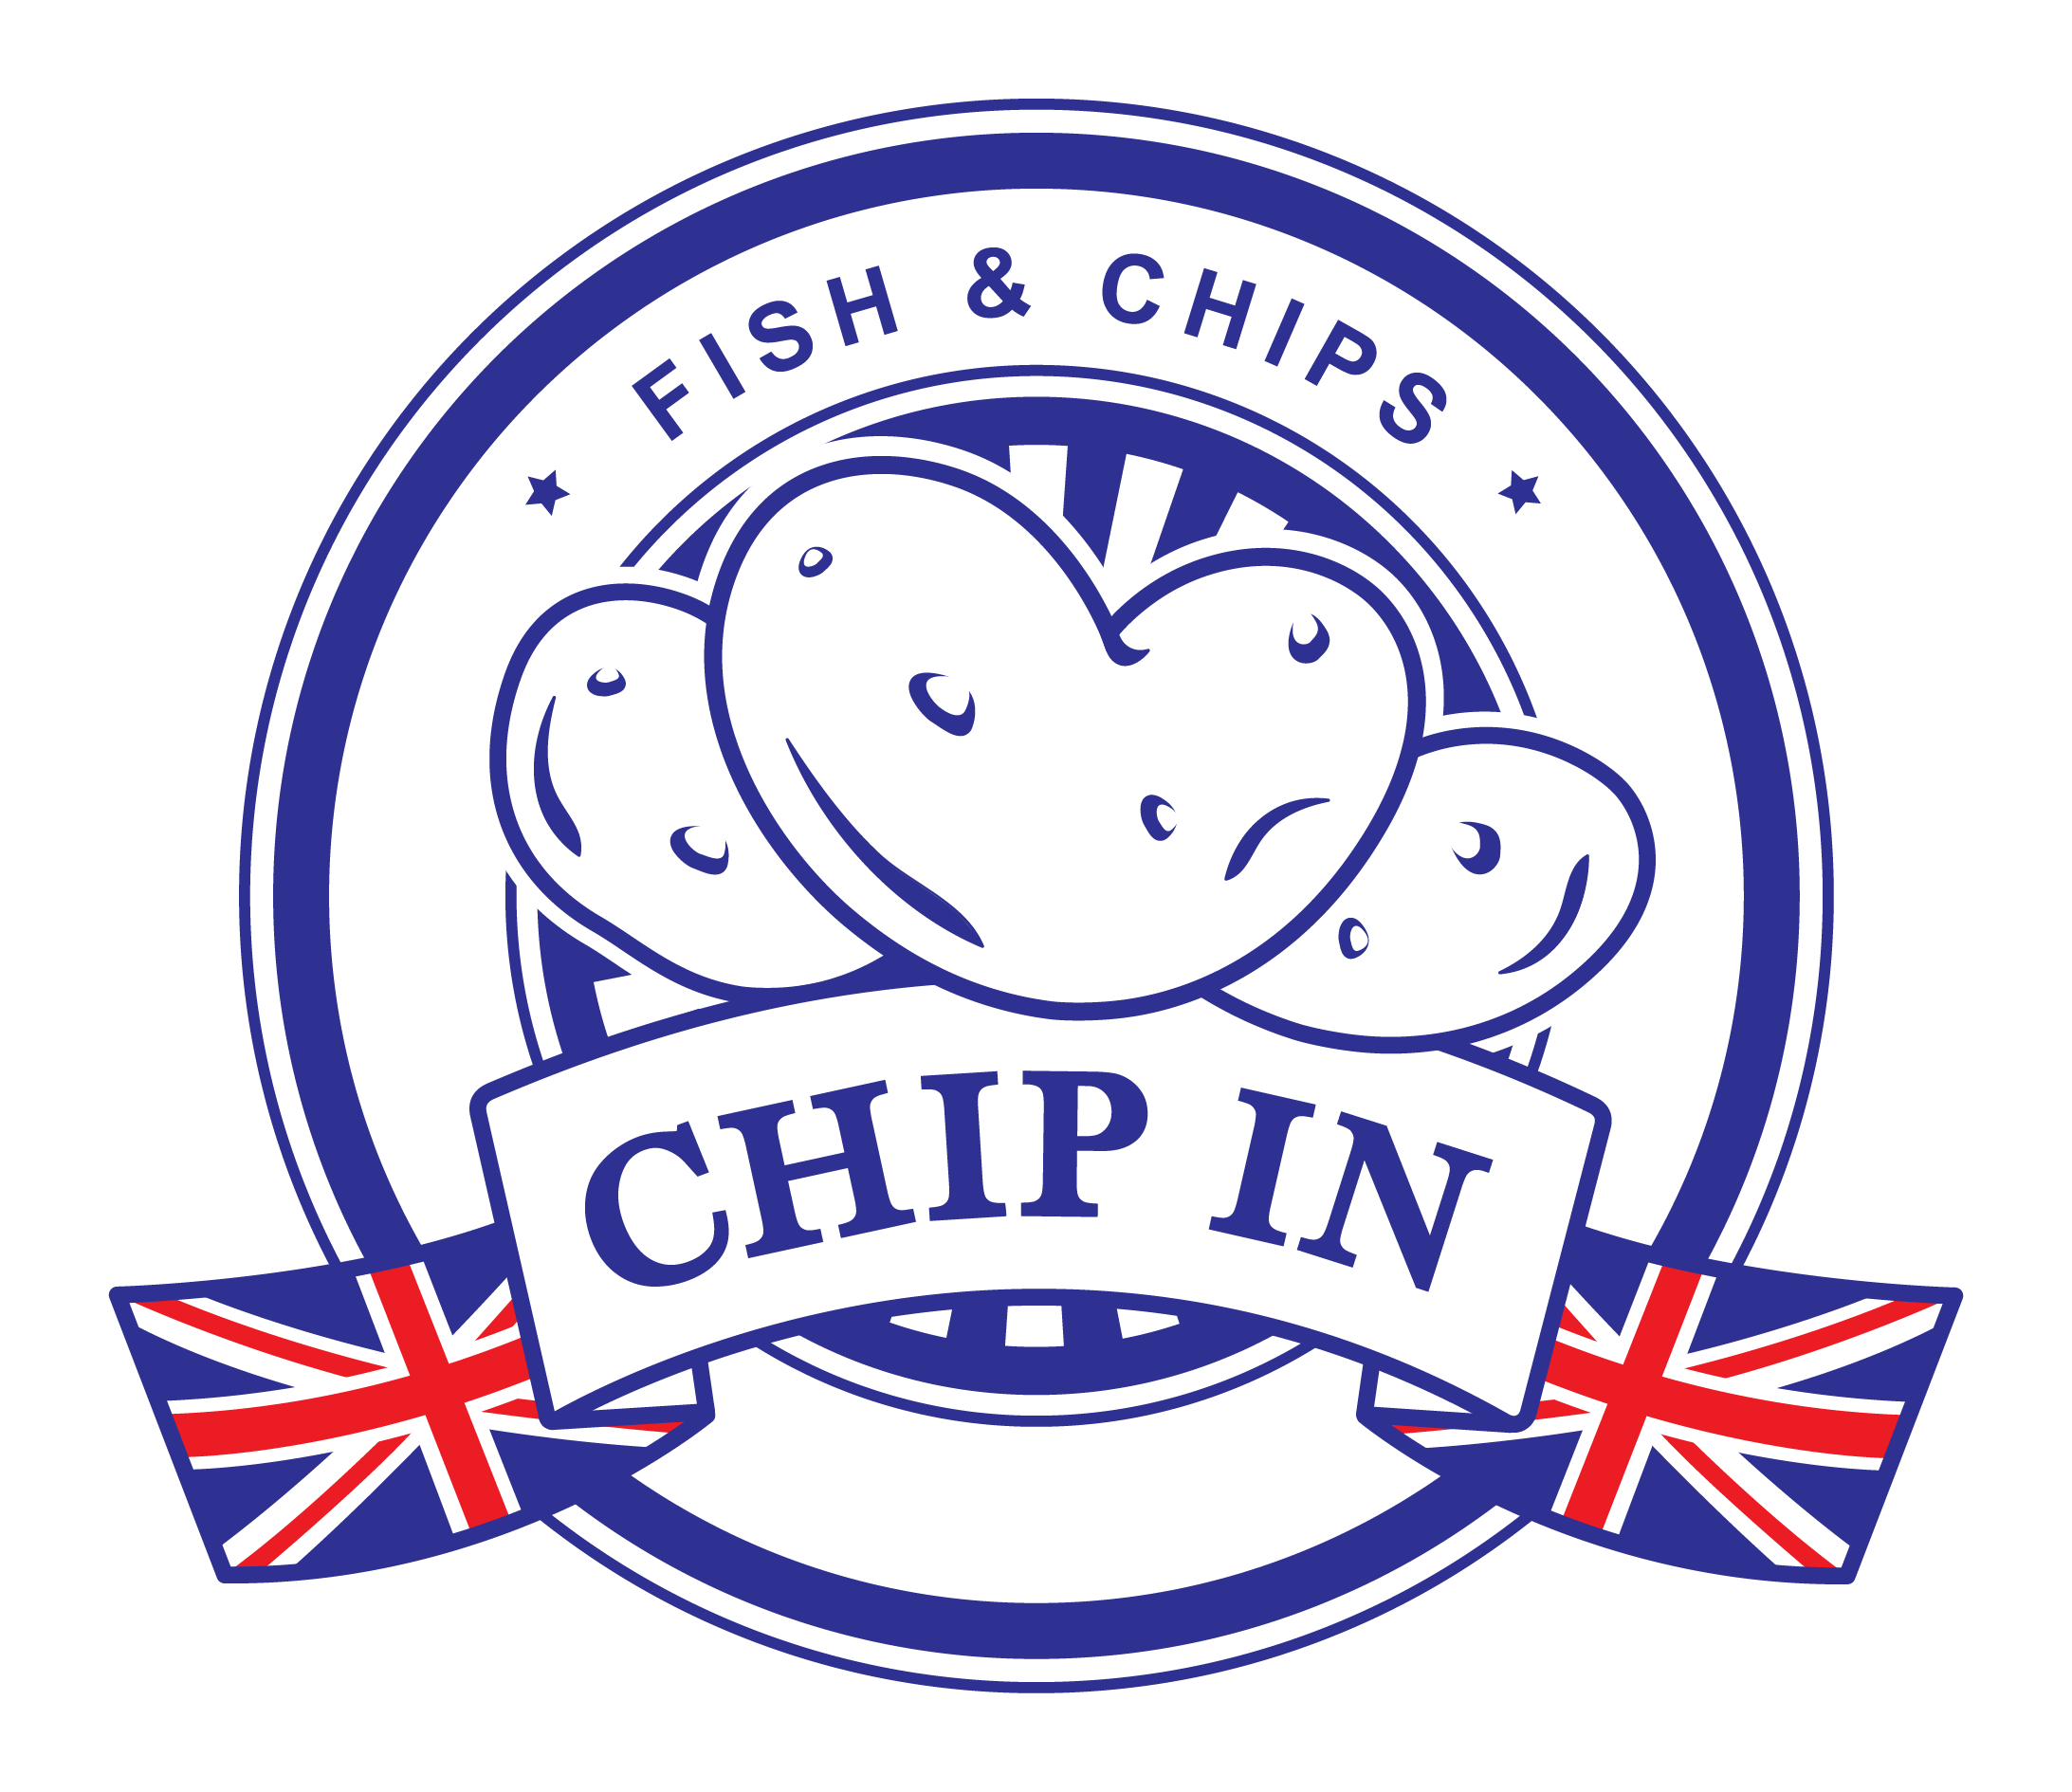 Chip In Fish & Chips